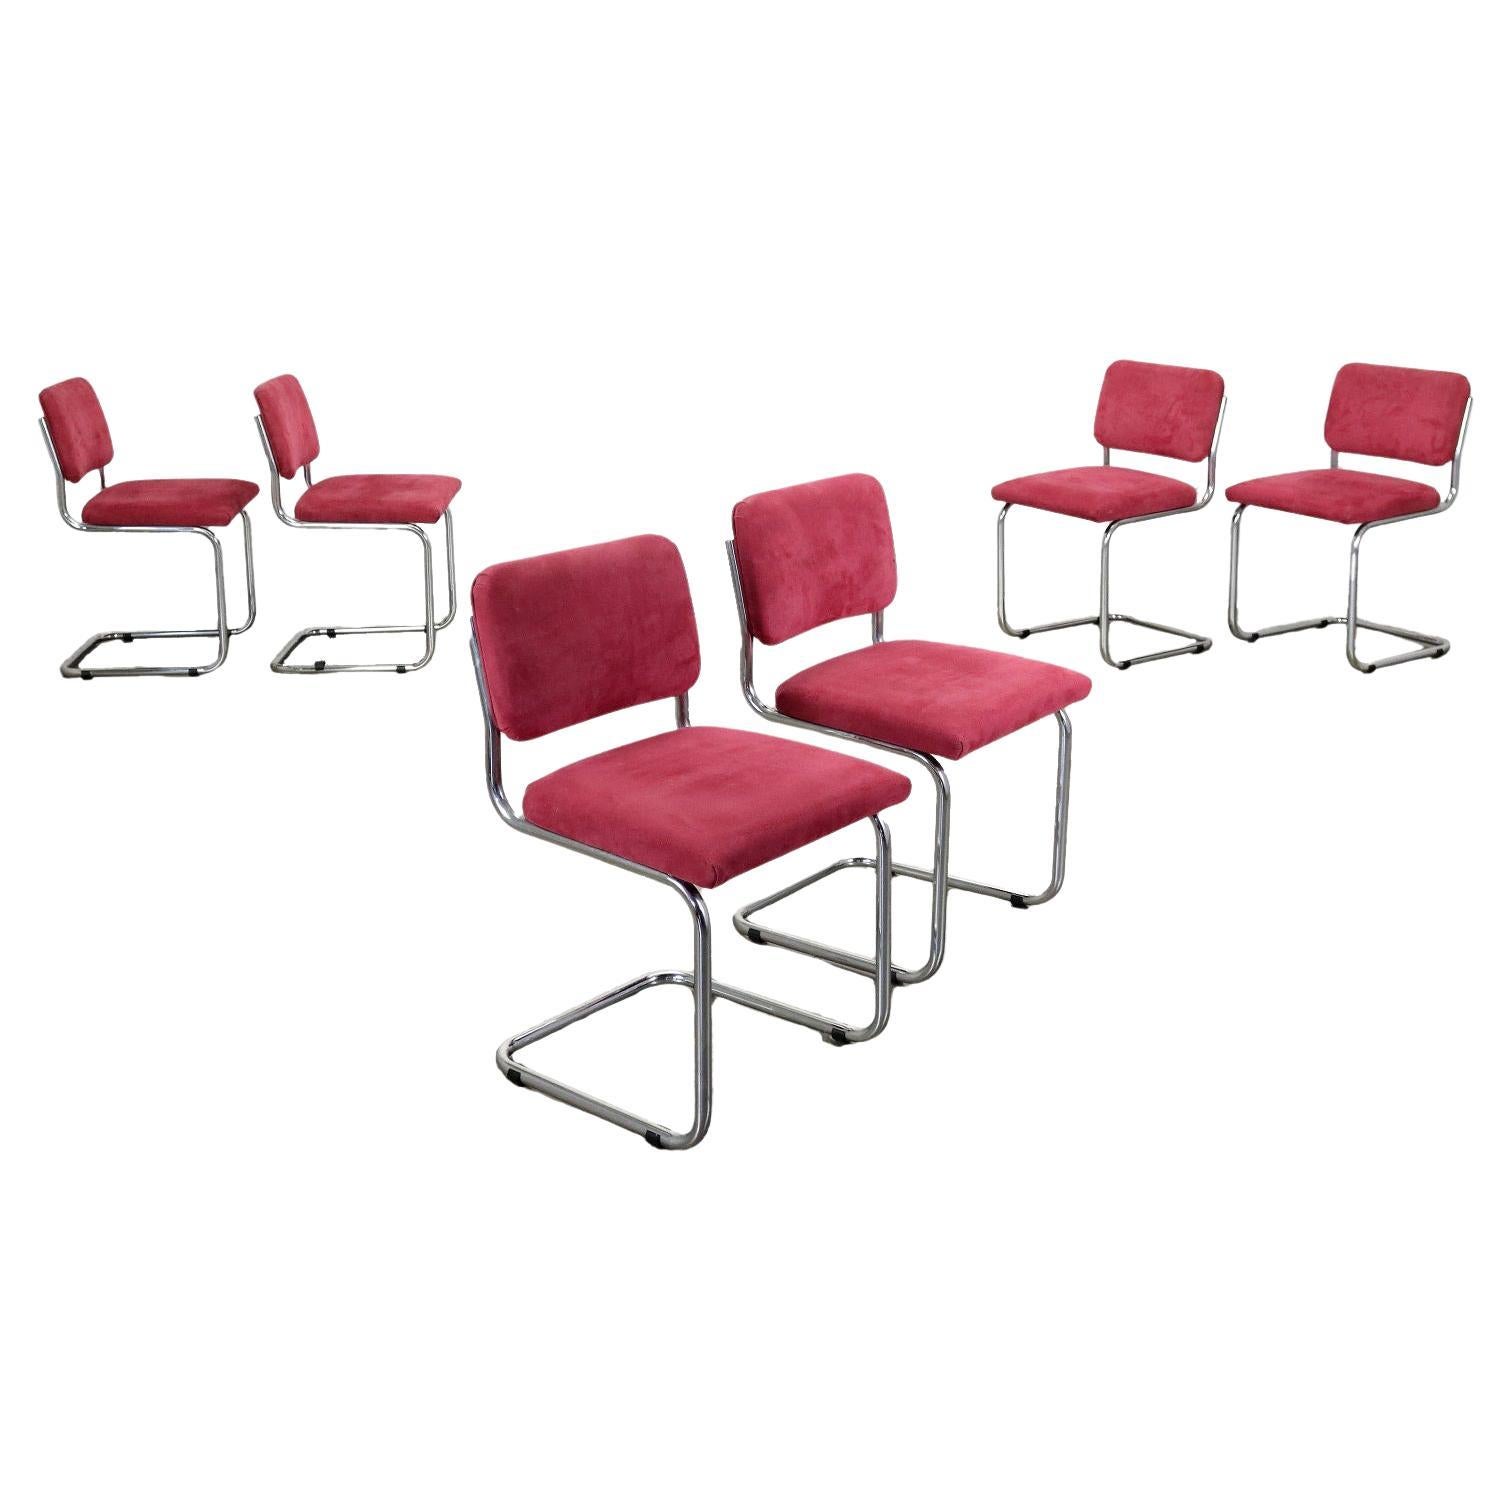 Six 1960s-70s "Cantilever" Chairs For Sale at 1stDibs